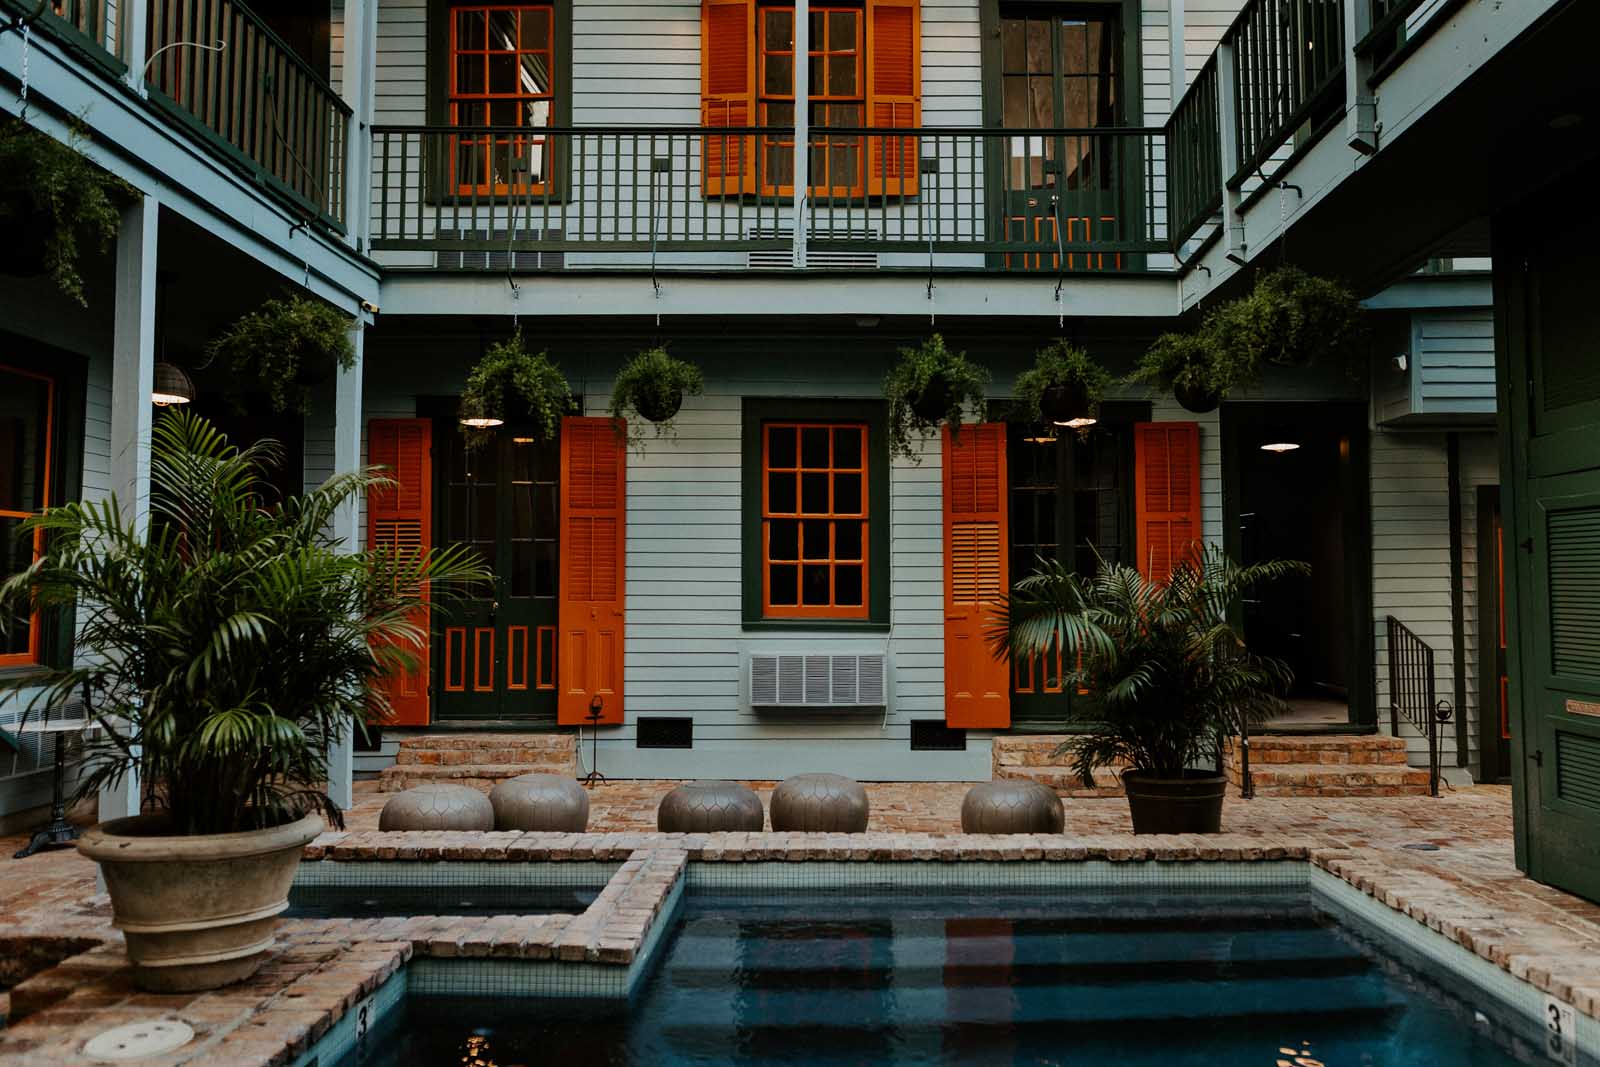 Top NOLA Boutique Hotels The Frenchman ool